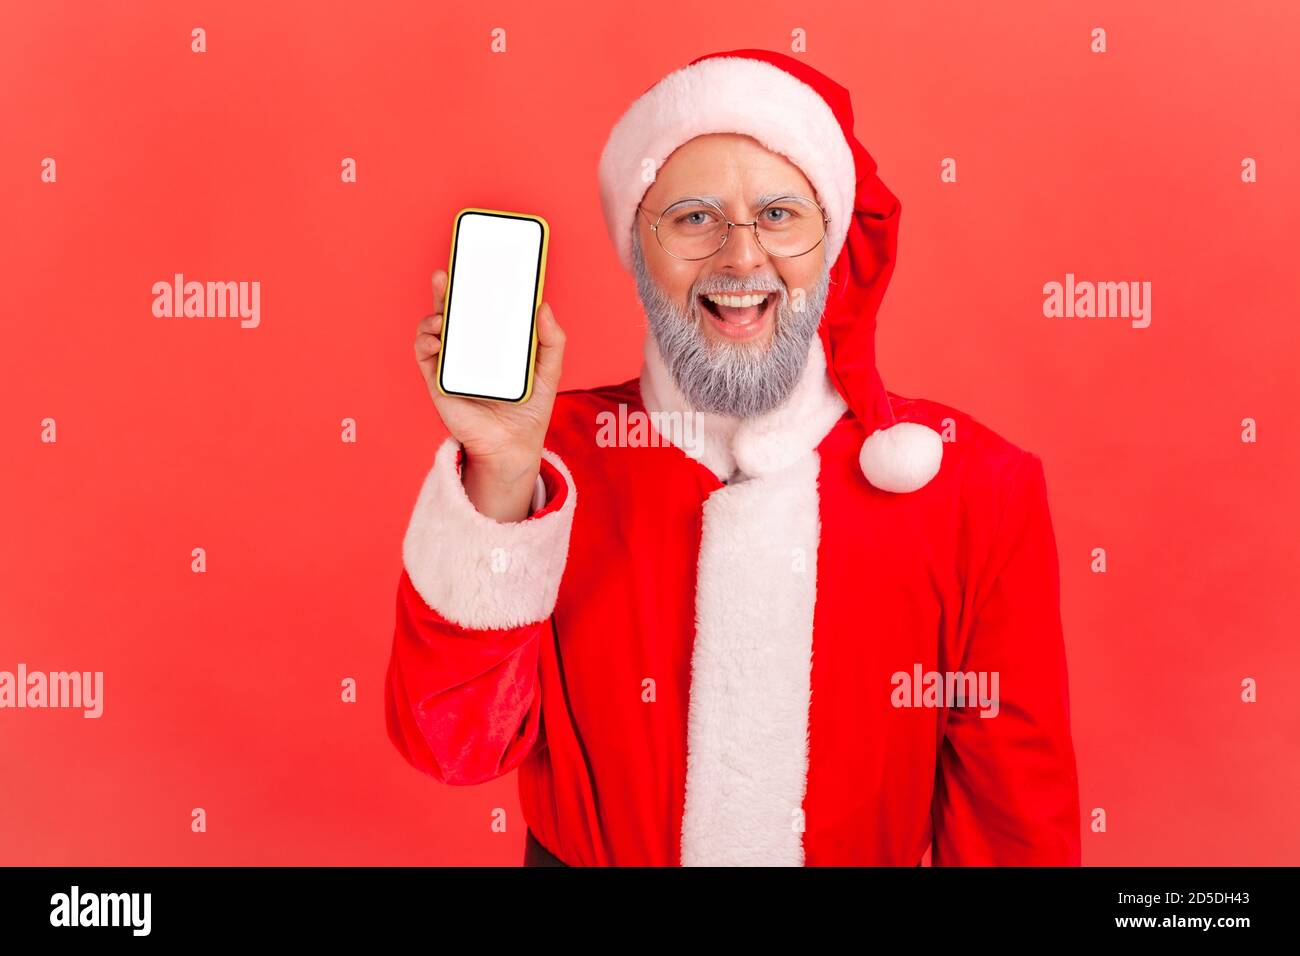 Happy gray bearded santa claus holding and showing smartphone with white display looking at camera with toothy smile. Indoor studio shot isolated on r Stock Photo